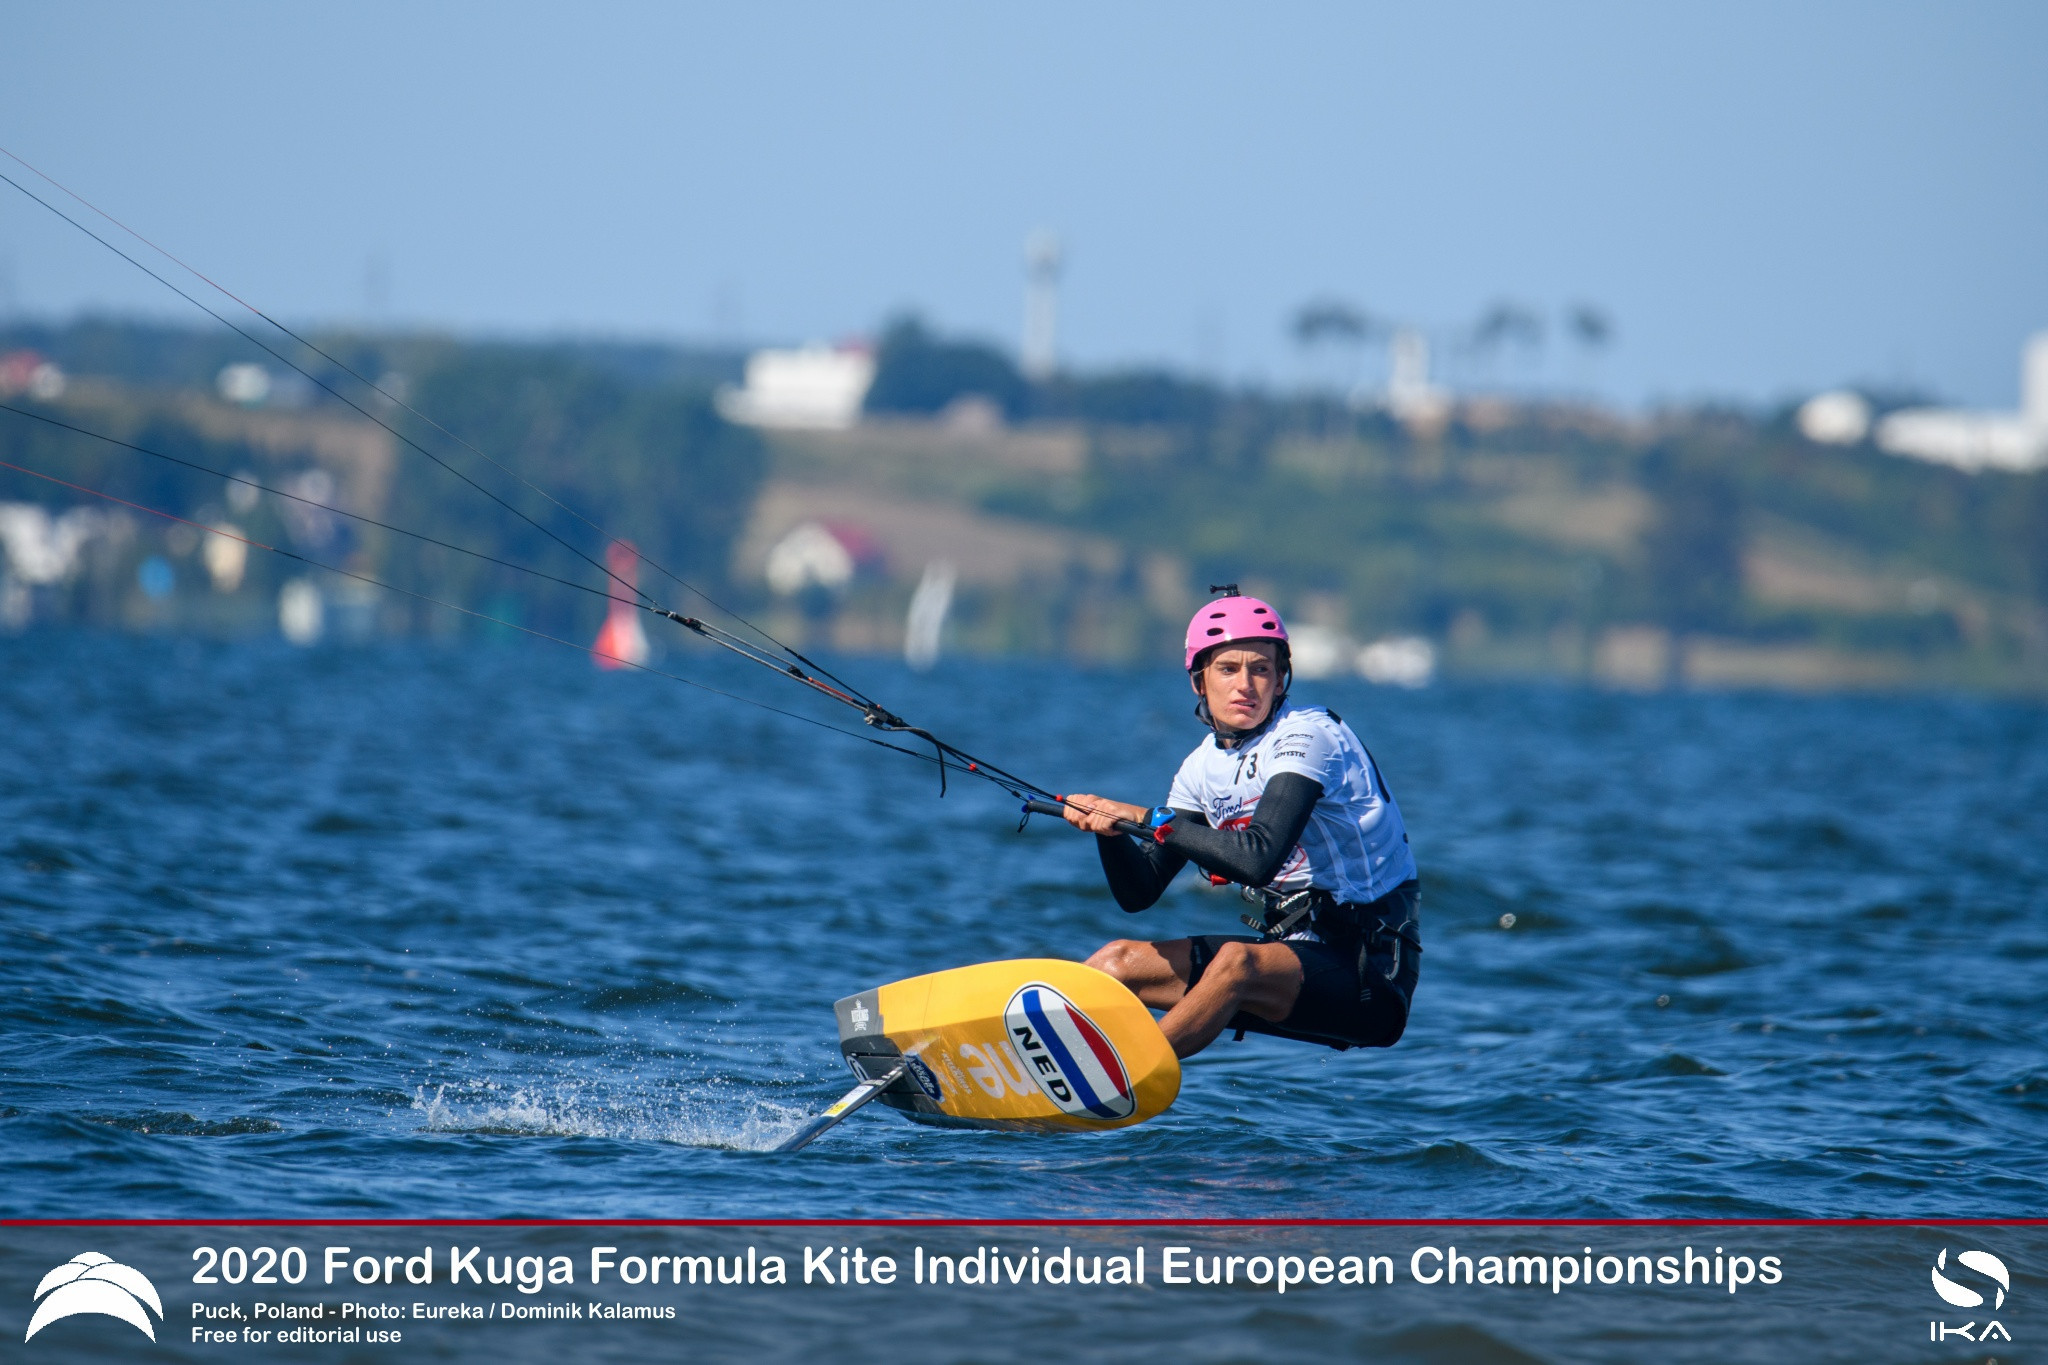 Poland had a great first day in the women's event©IKA